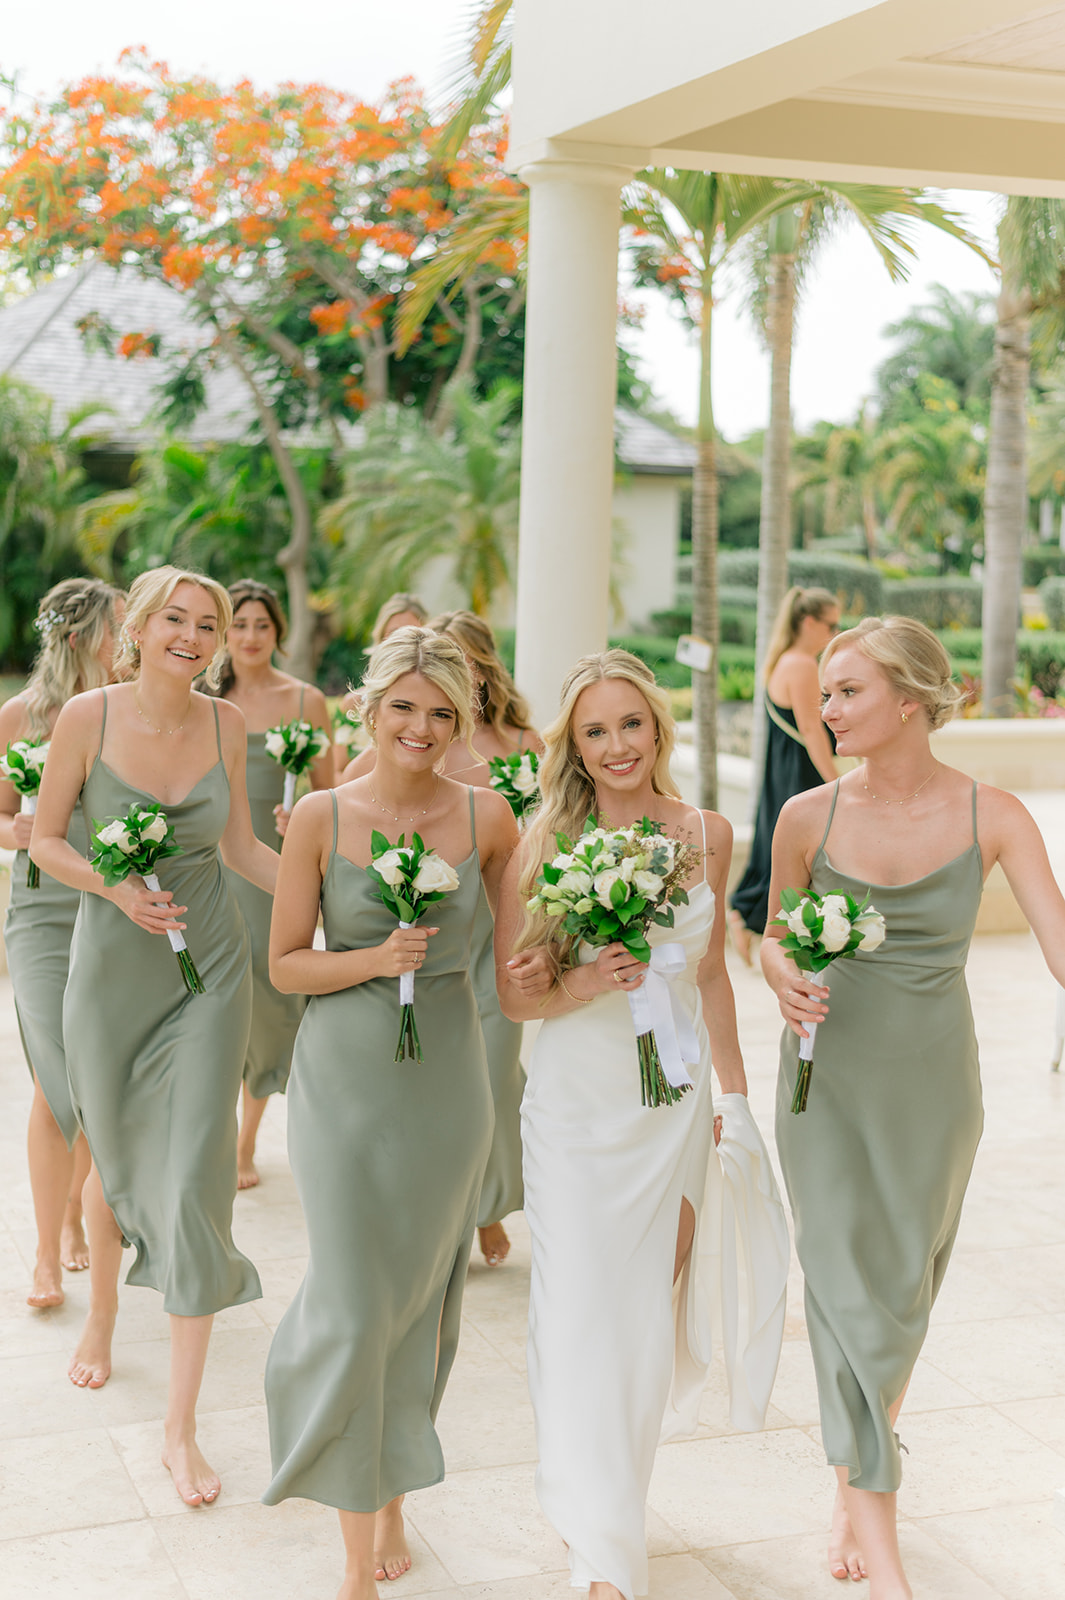 Playful and fun wedding photography ideas for your Antigua wedding
